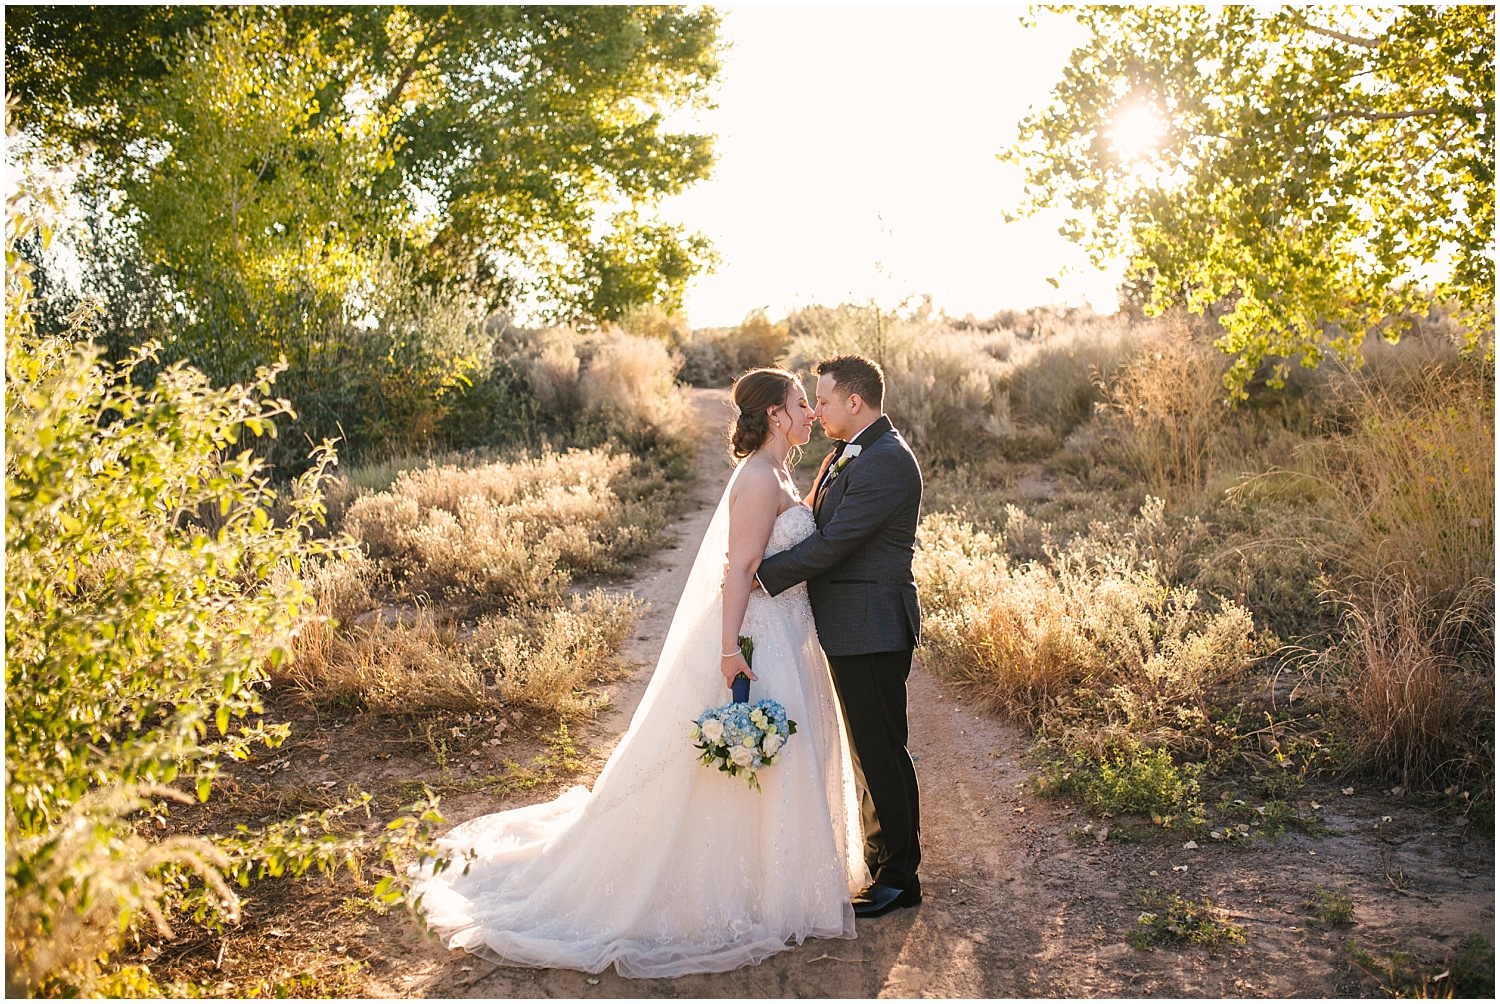 Bride and groom kissing at golden hour for their fall wedding at Prairie Star Restaurant